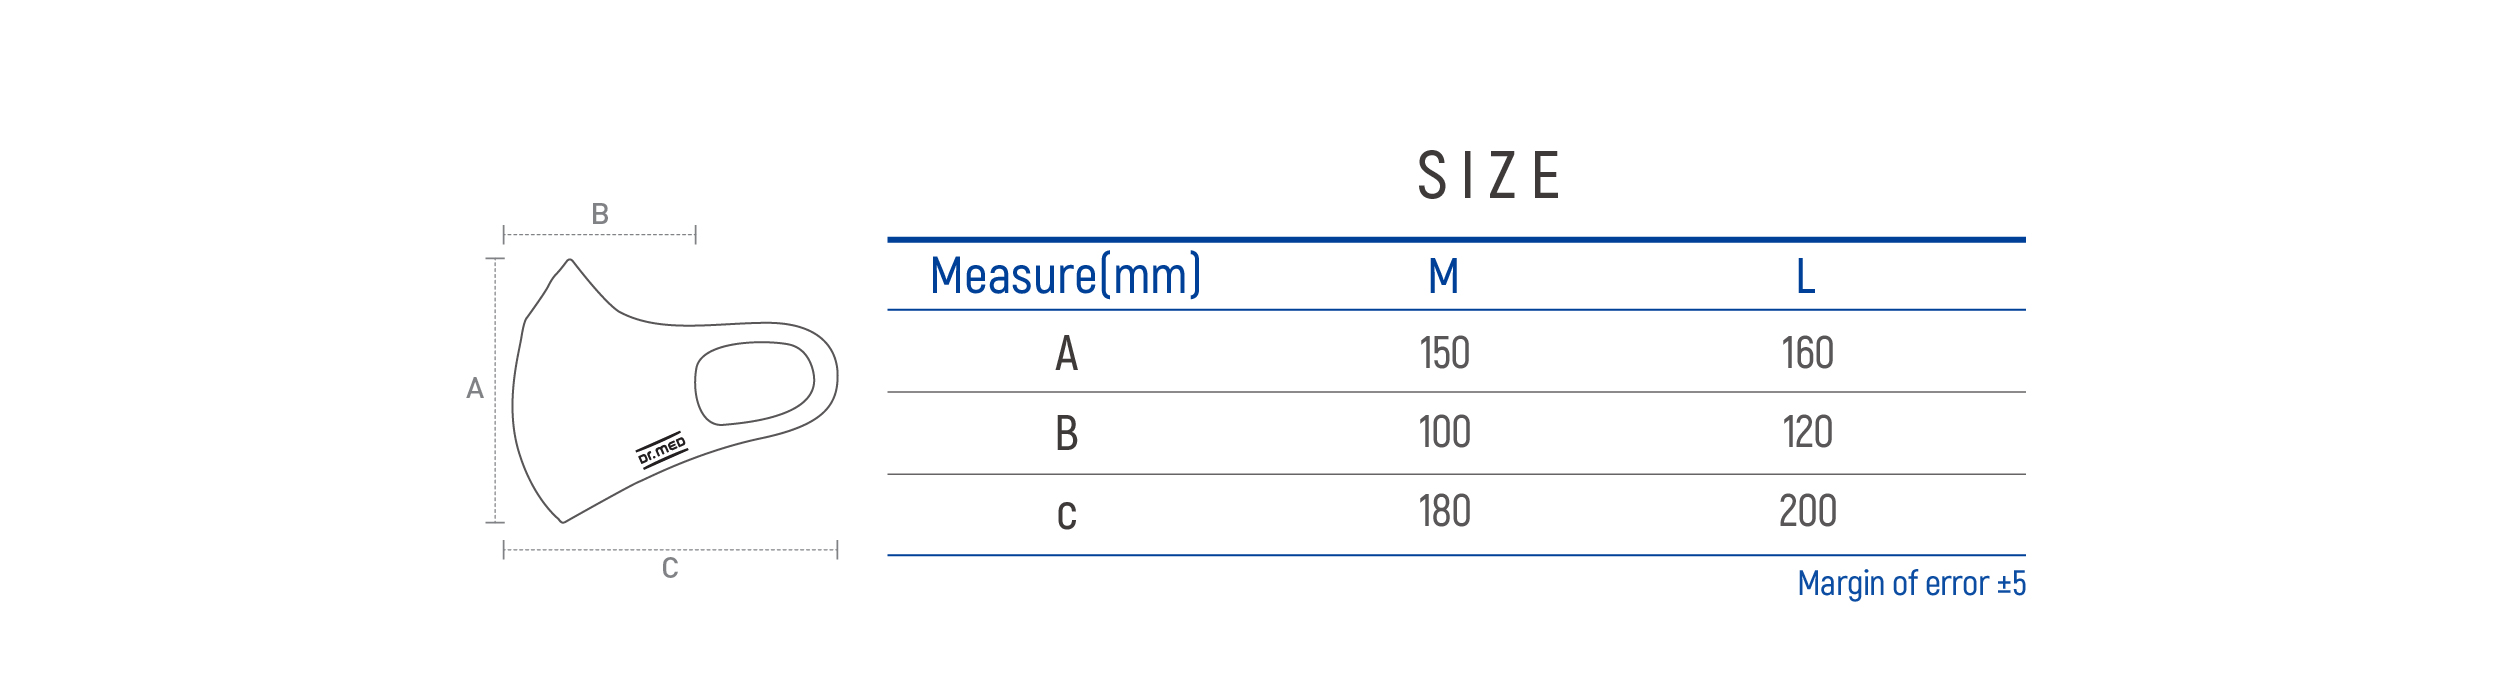 DR-M500 Size table image